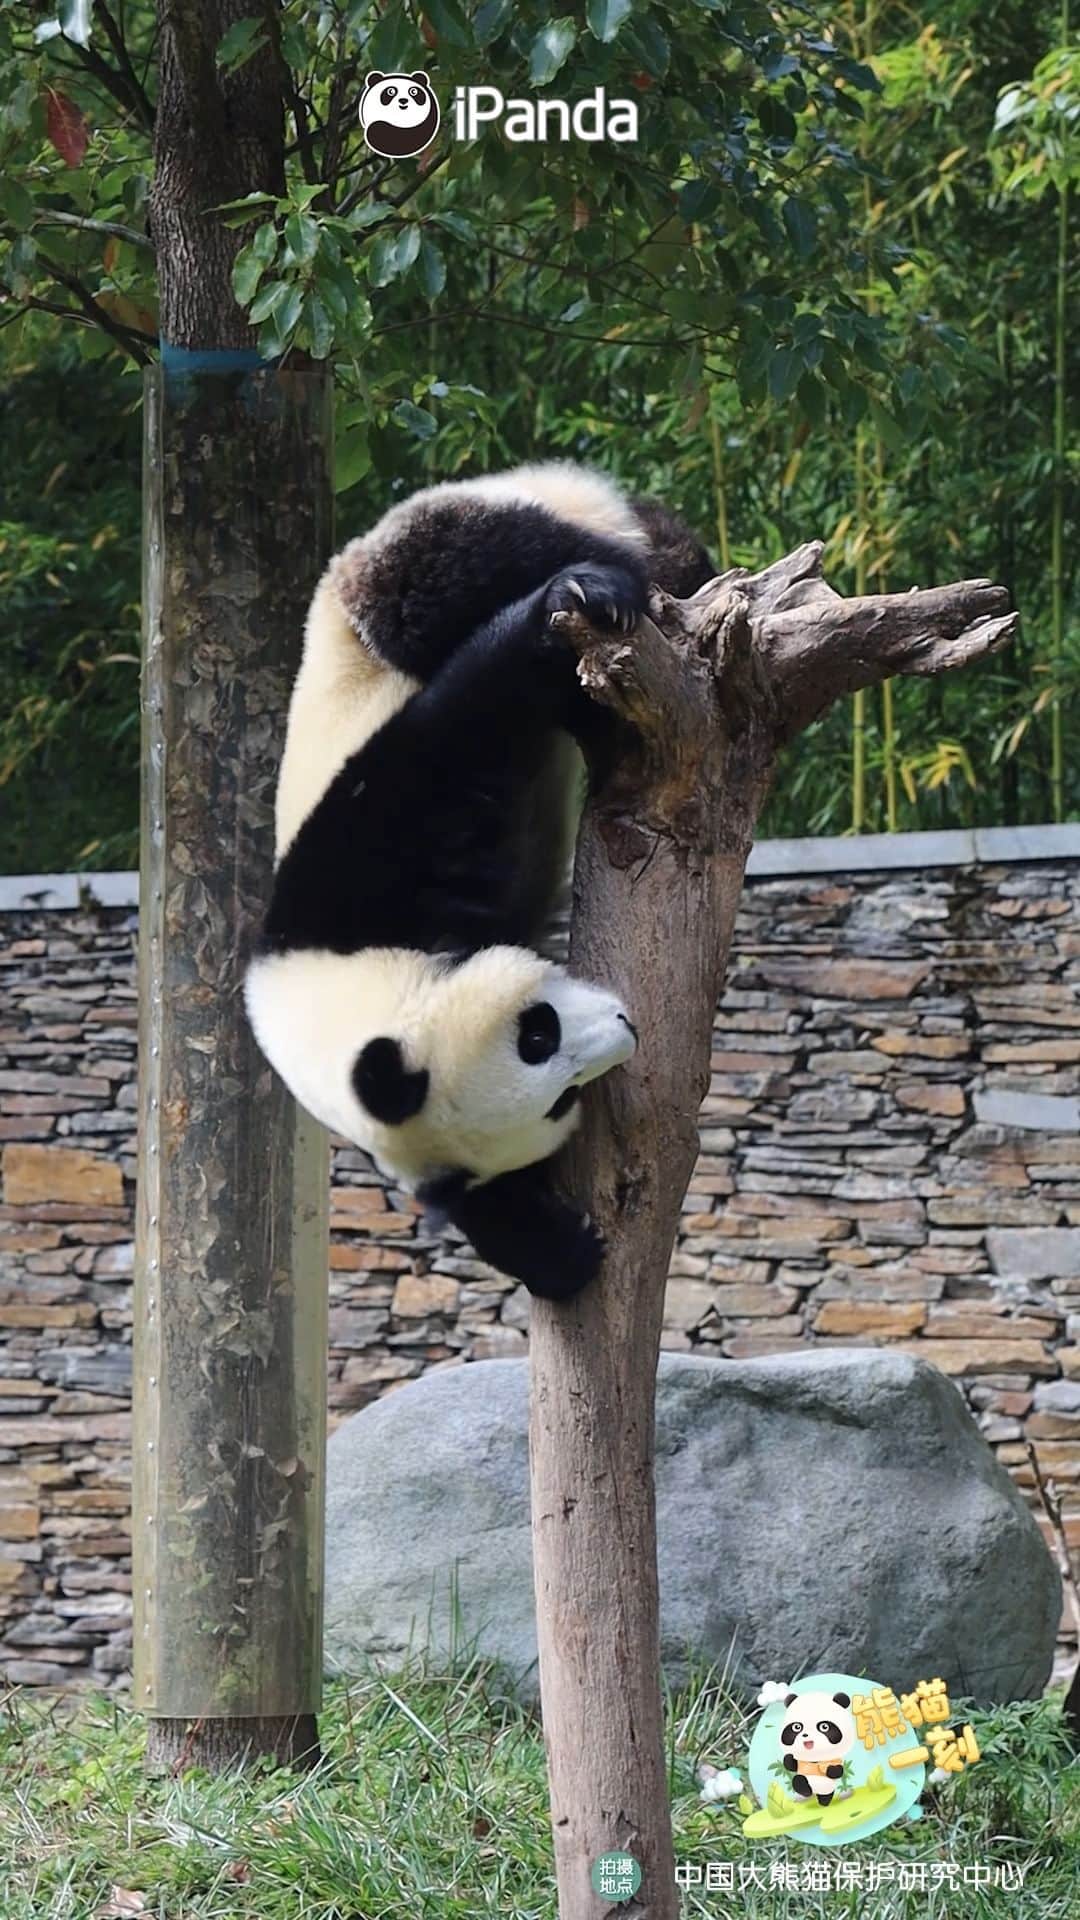 iPandaのインスタグラム：「This set of smooth motions may not even be possible for professional gymnasts! The only downside is that my butt hurts a bit. (Yan Hui’s cub) 🐼 🐼 🐼 #Panda #iPanda #Cute #HiPanda #CCRCGP #PandaMoment   For more panda information, please check out: https://en.ipanda.com」